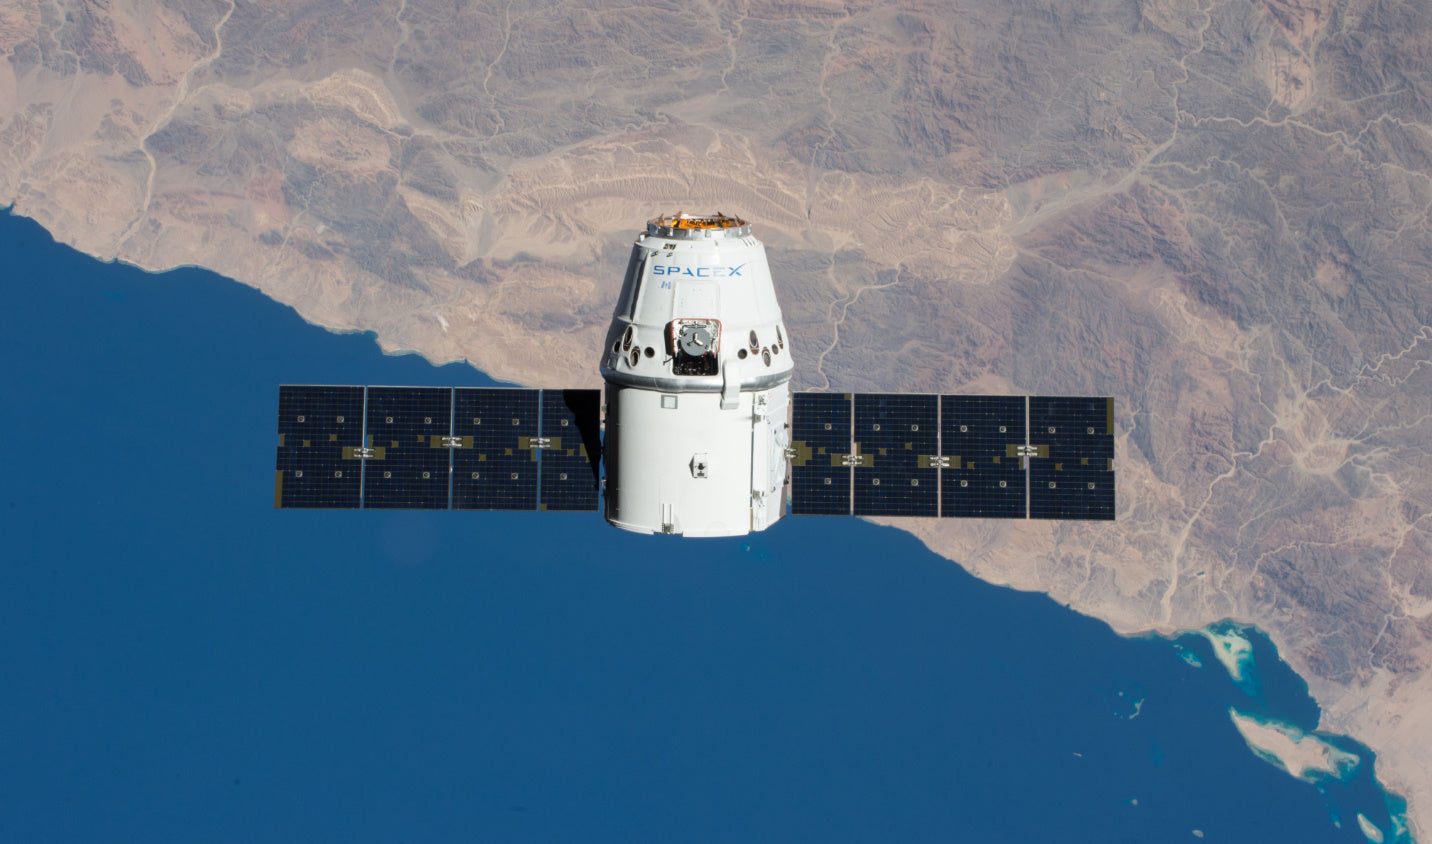 SpaceX will perform Dragon's CRS-20 resupply mission for NASA to the International Space Station next week